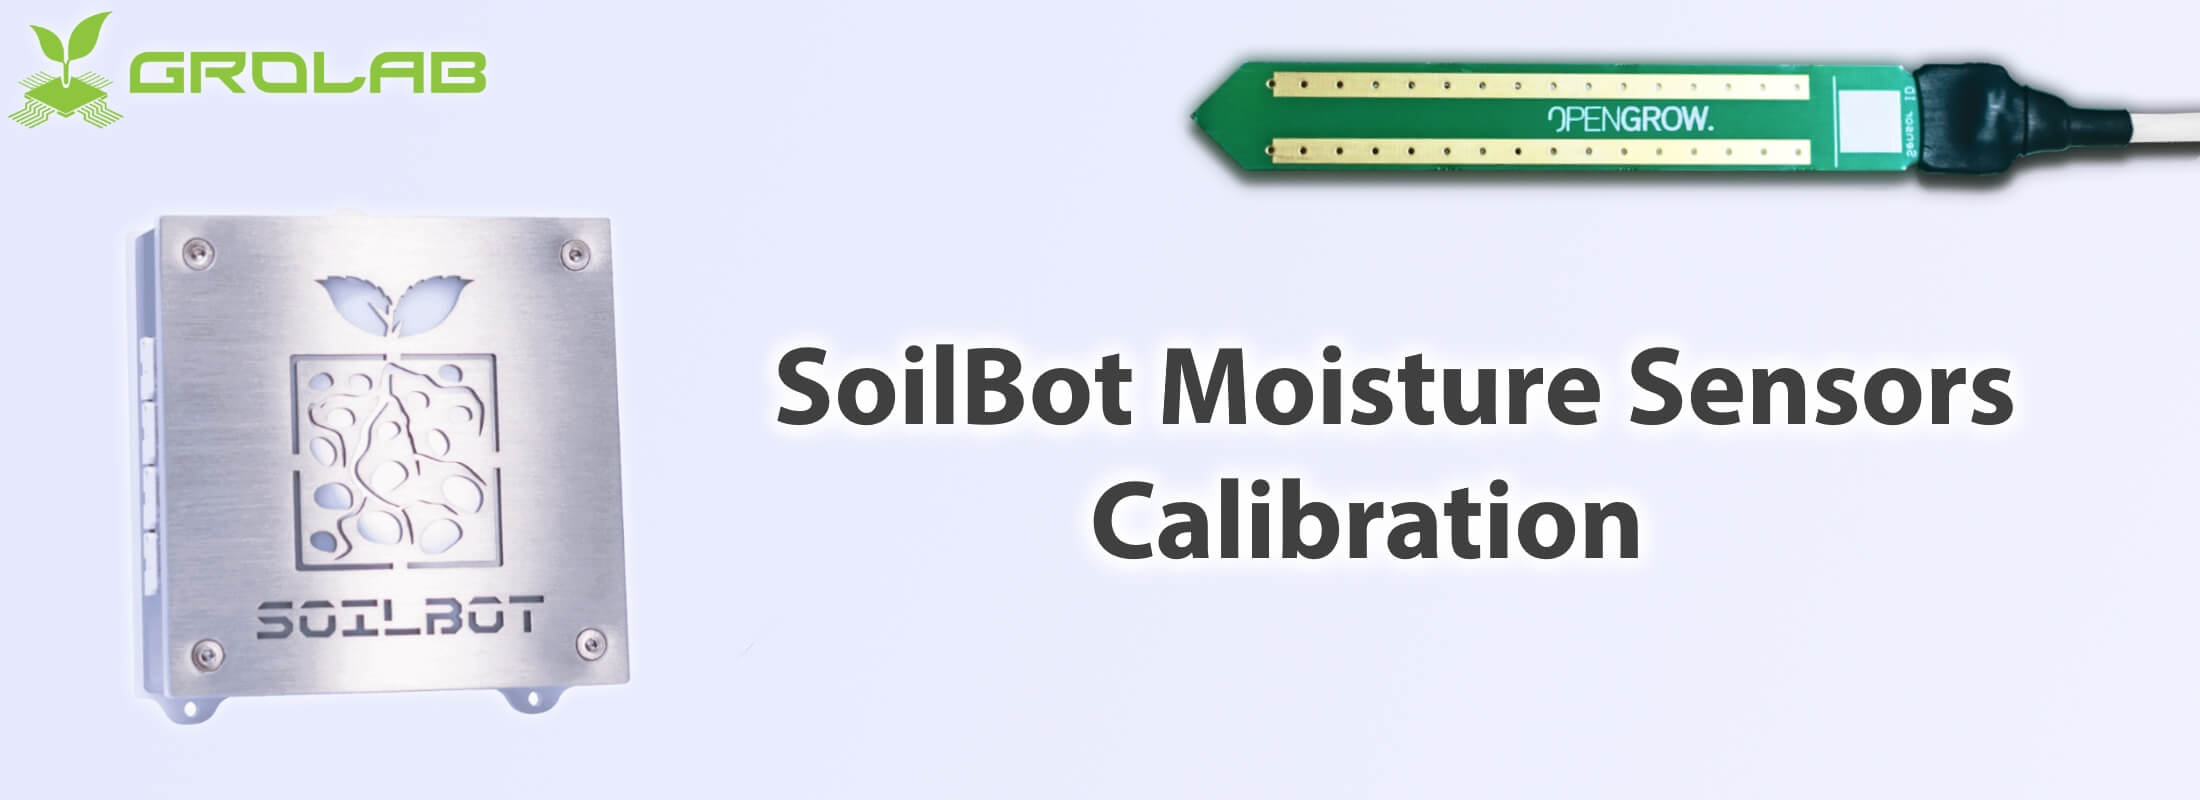 On the left side the GroLab™ logo and front view of SoilBot, the GroLab™ substrate analyzer, on the right side the top view of moisture substrate sensor and below it the text "SoilBot Moisture Sensors Calibration"